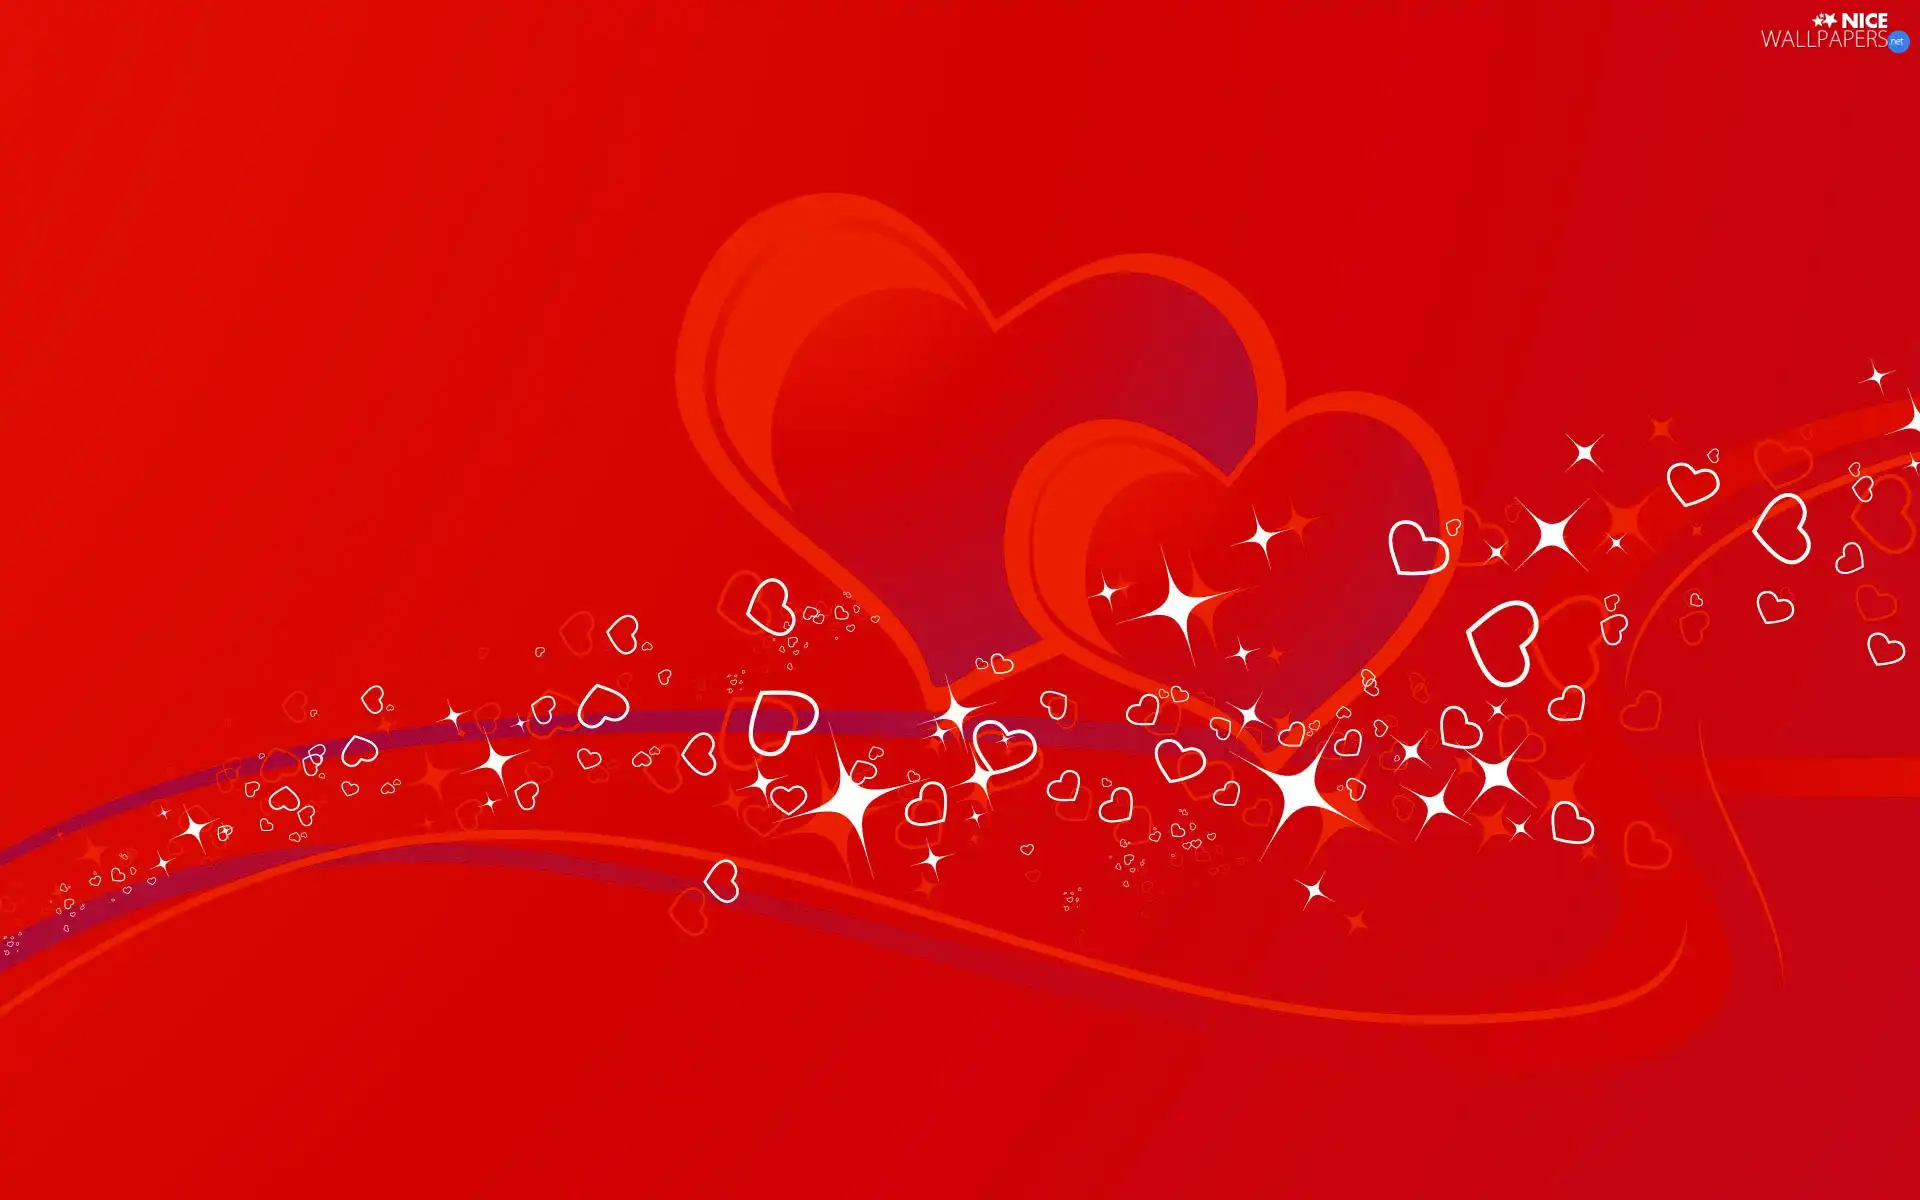 heart, Red, background, Stars